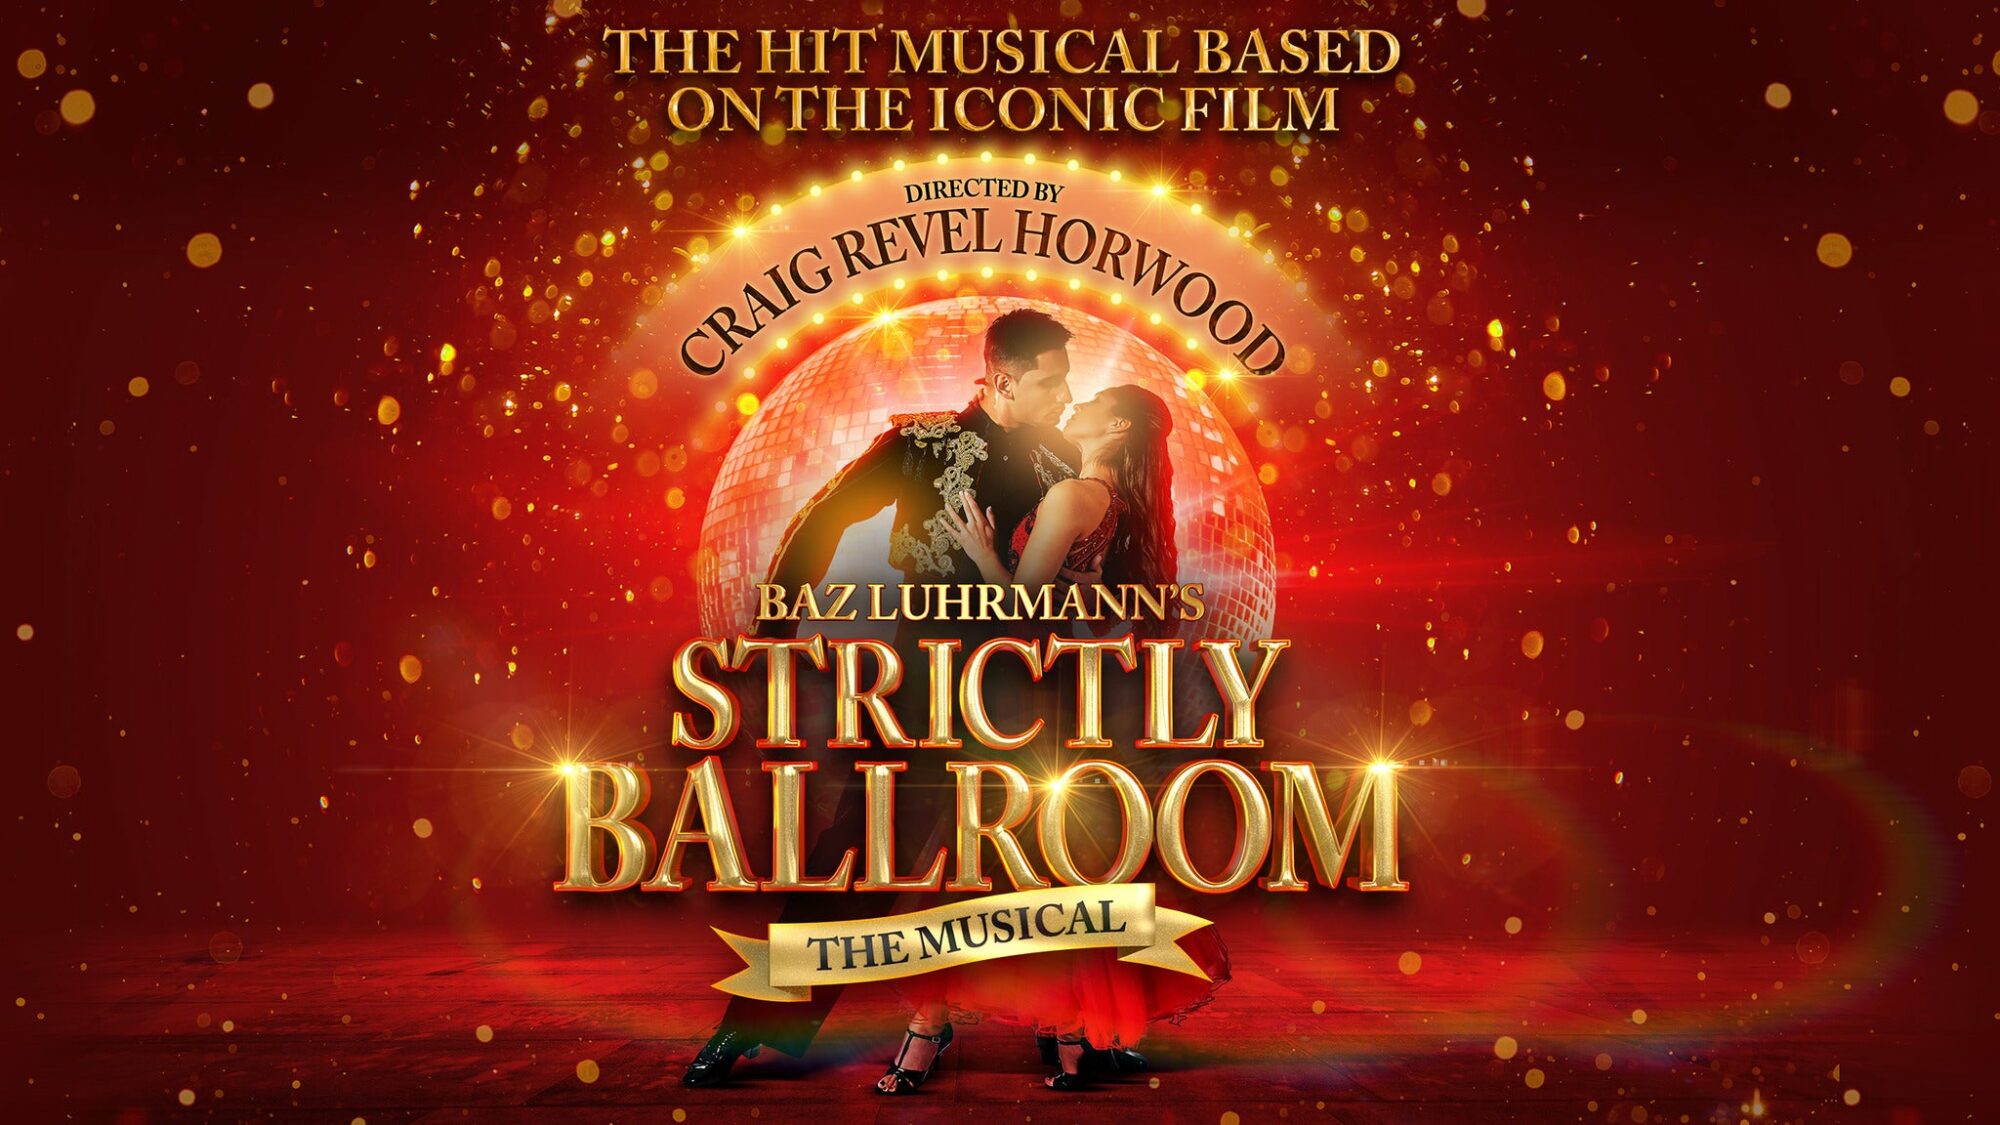 Image name Strictly Ballroom The Musical at Hull New Theatre Hull the 7 image from the post Events in Yorkshire.com.